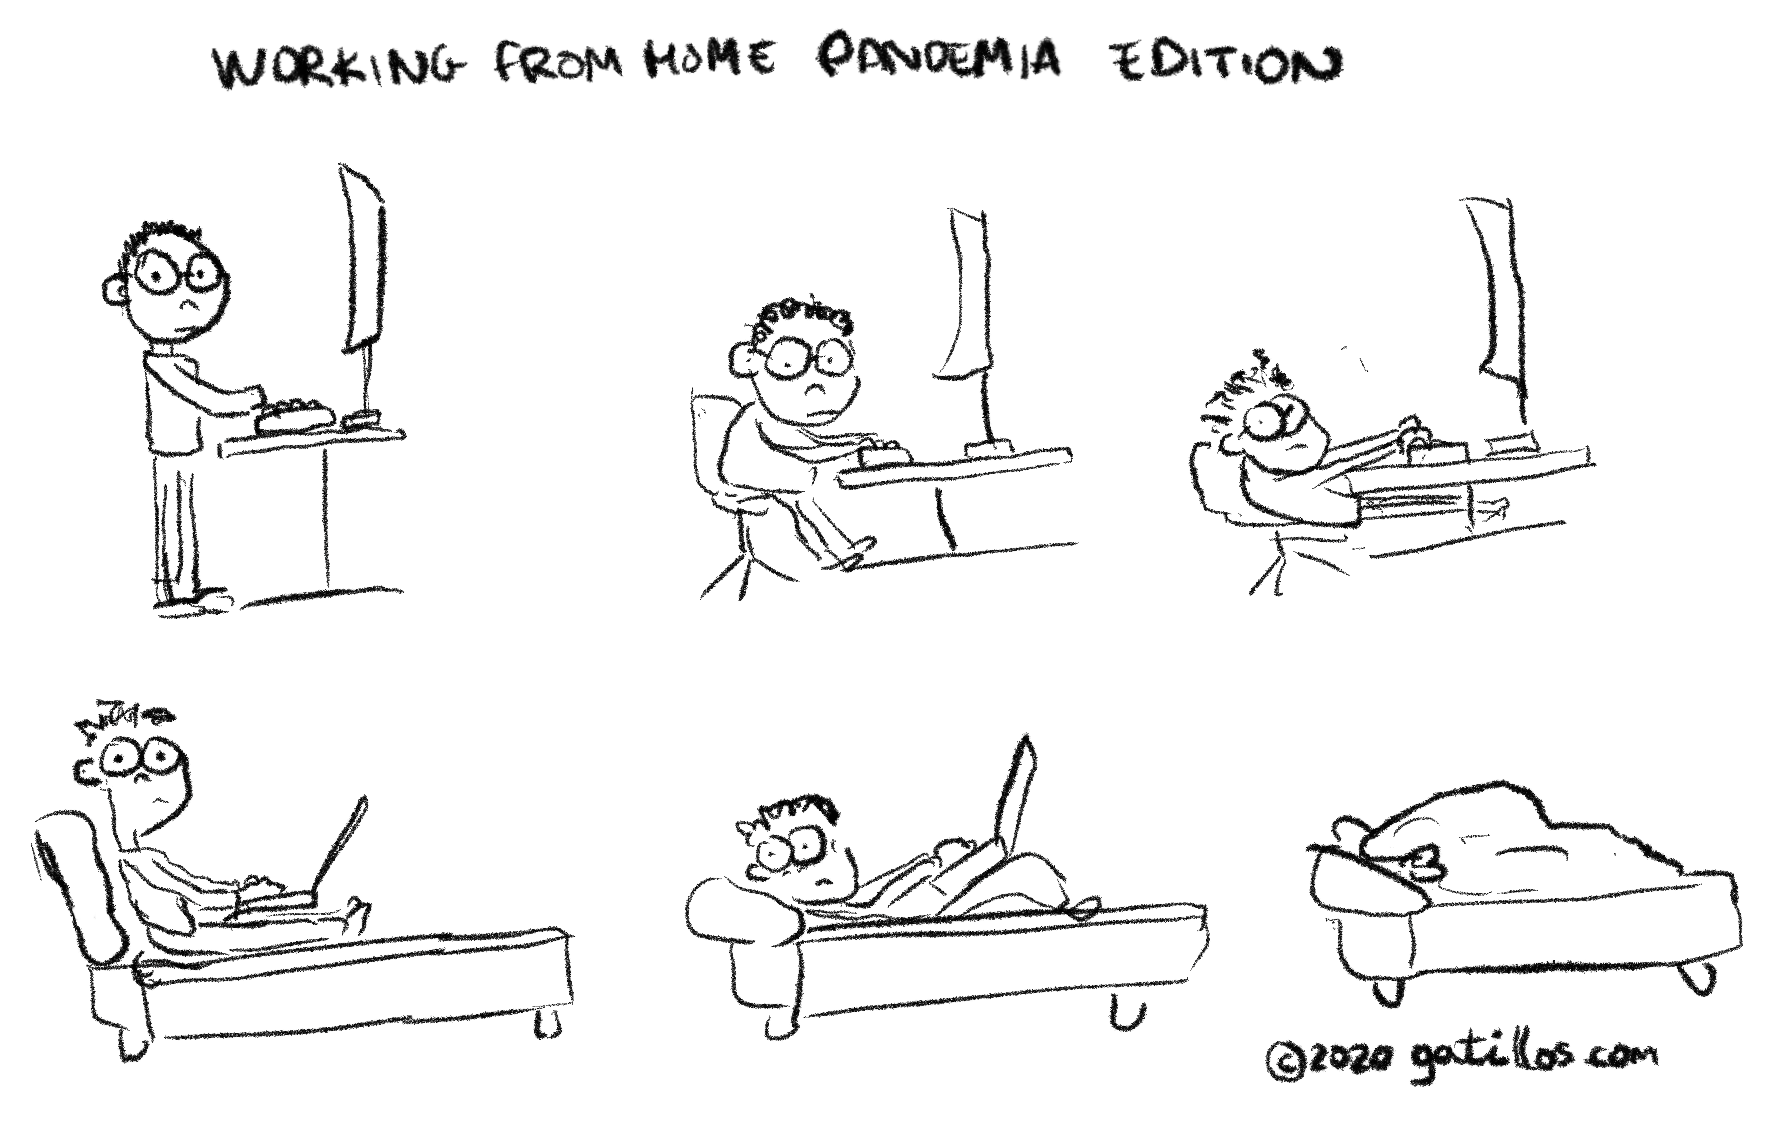 Working from home: Pandemia Edition